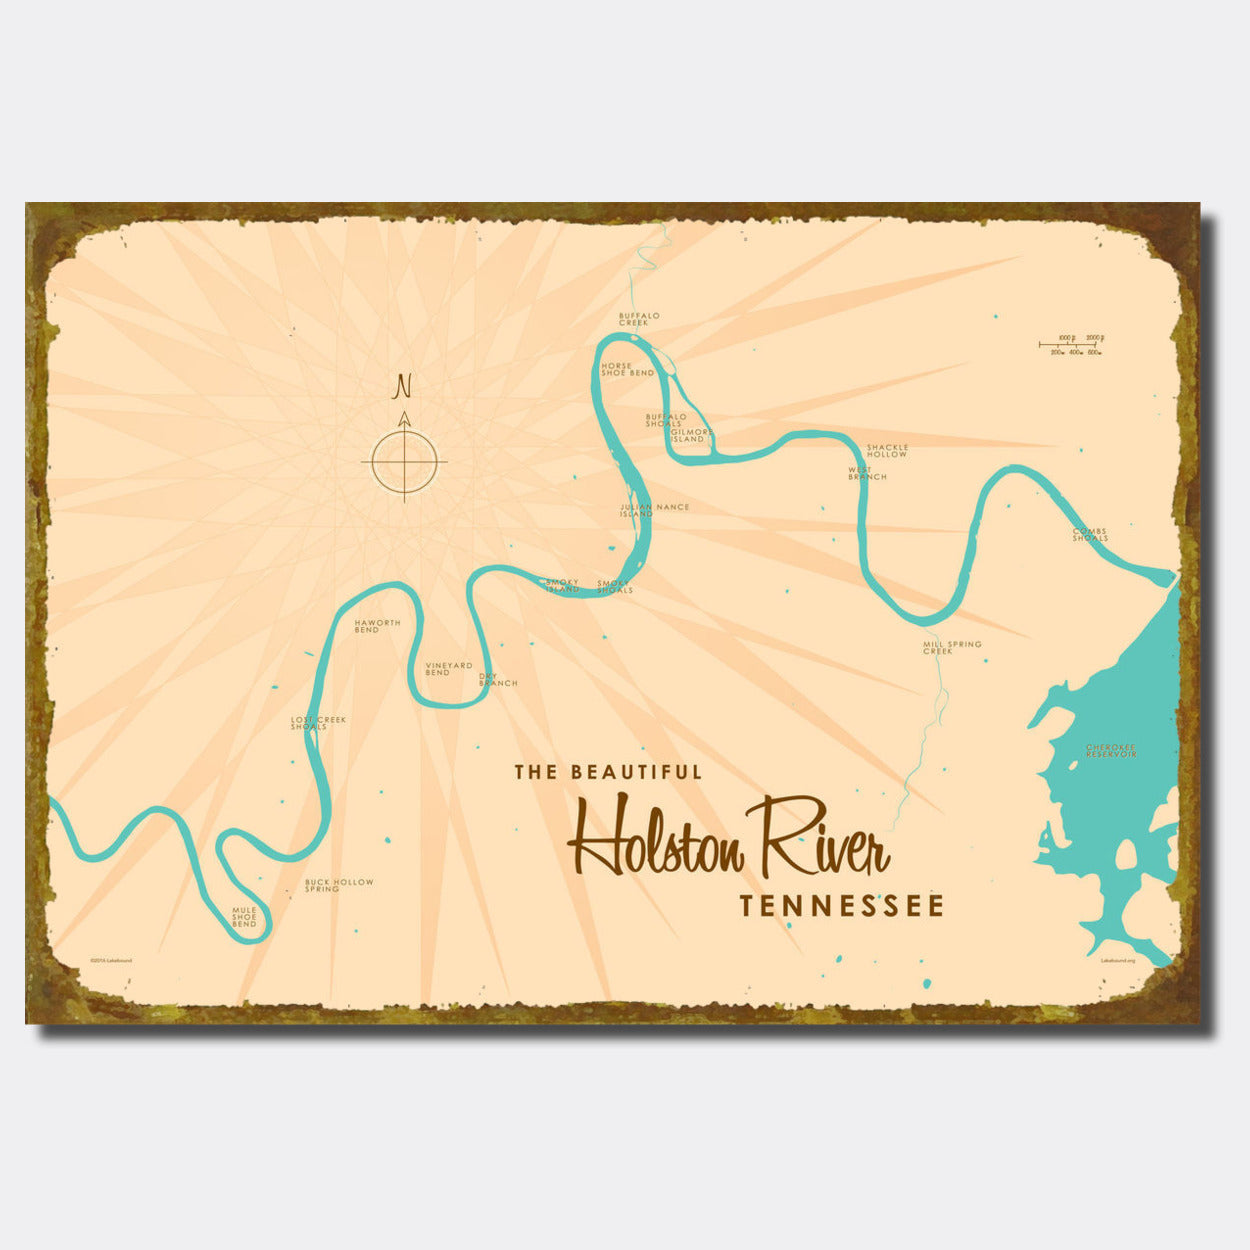 Holston River Tennessee, Sign Map Art